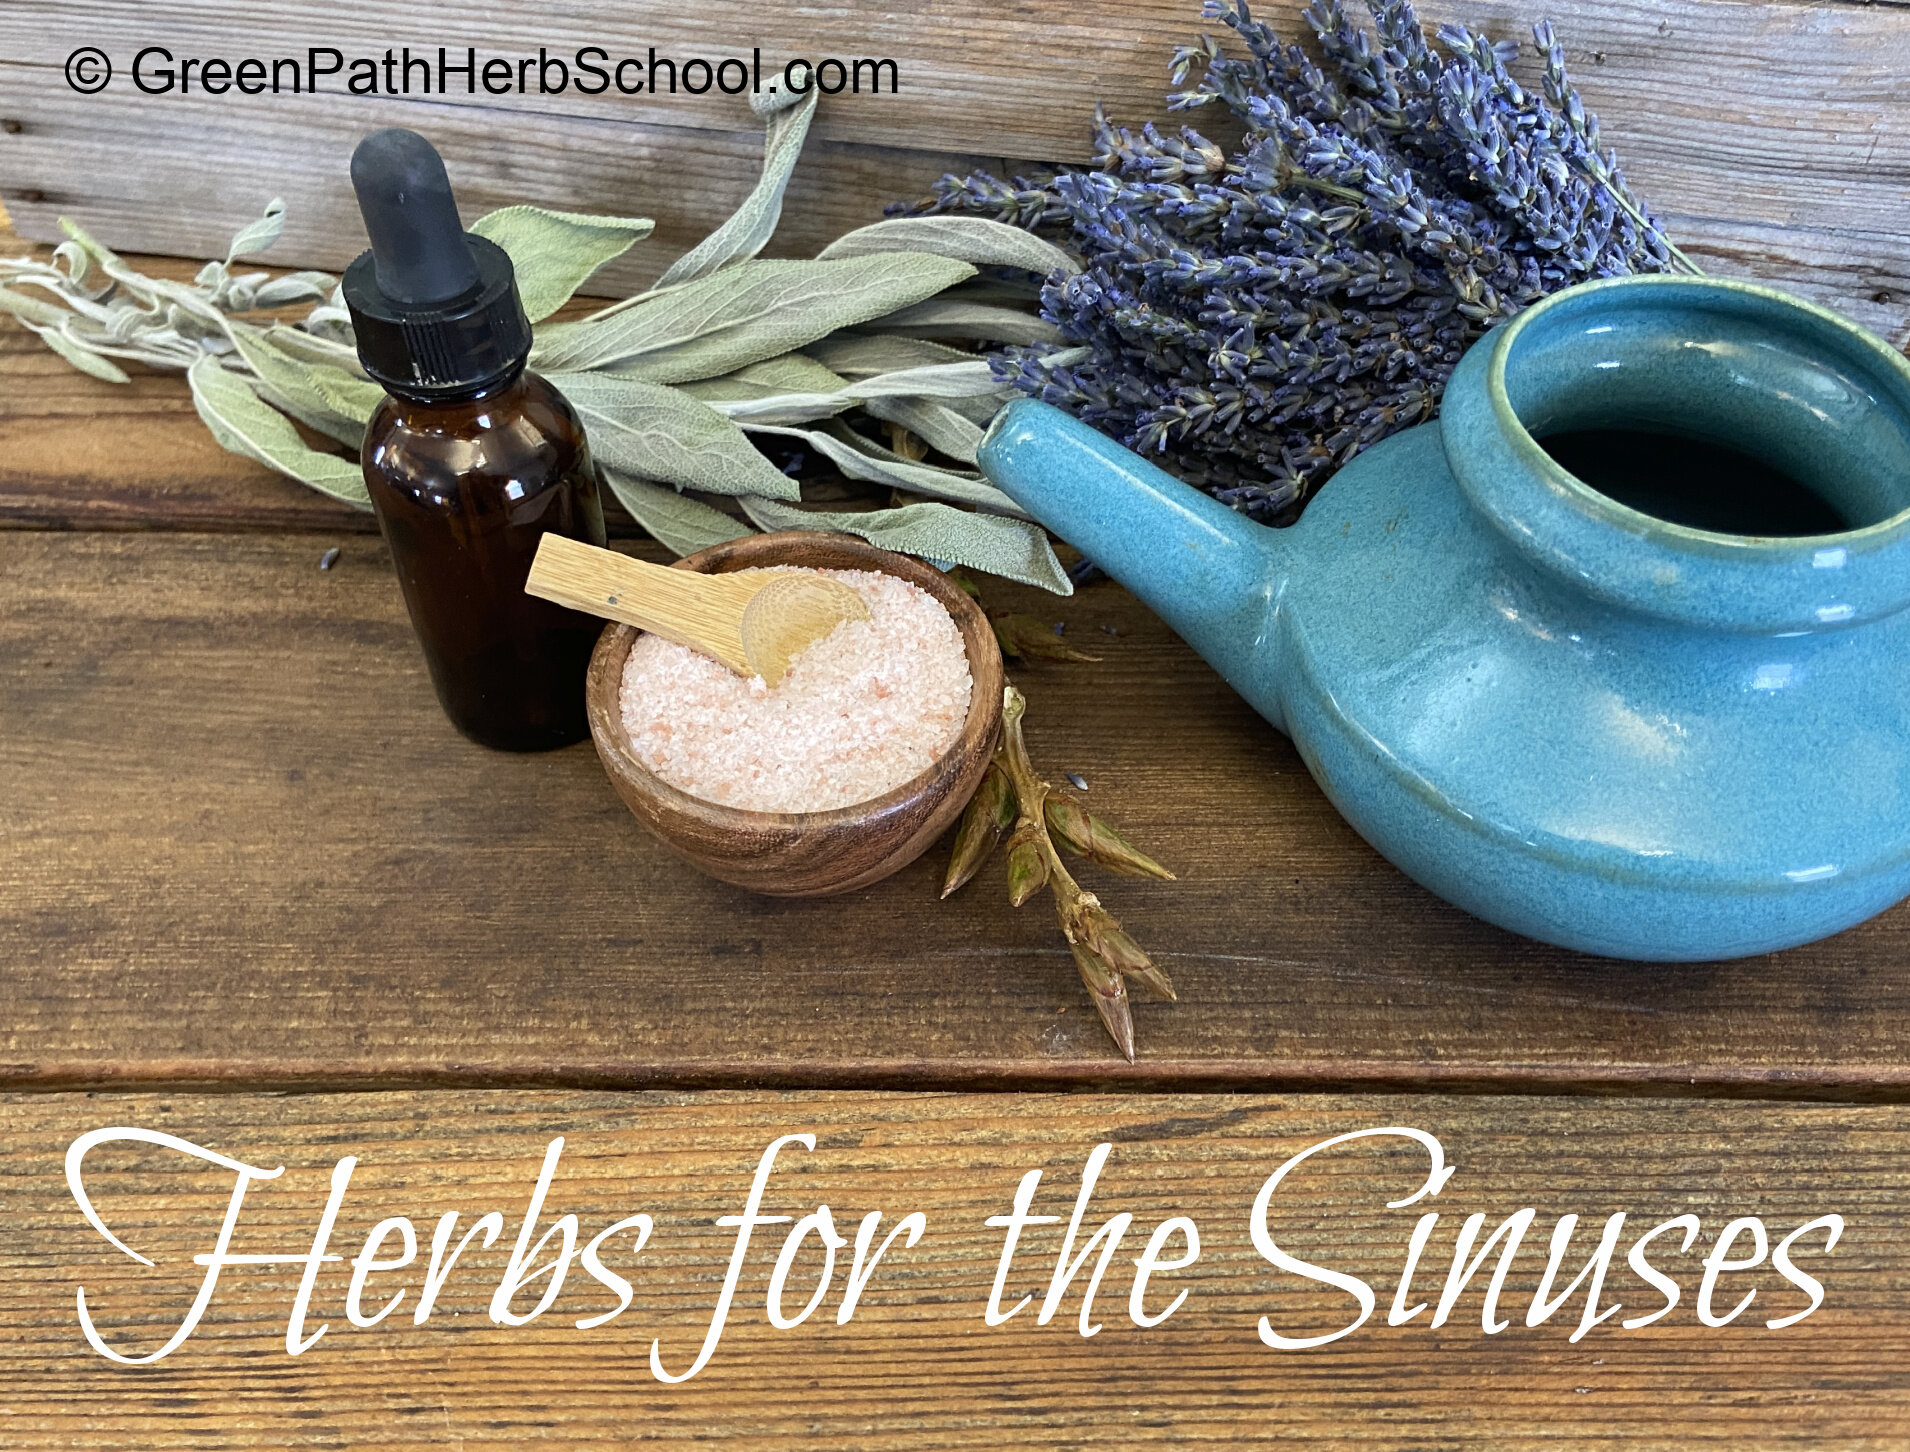 https://images.squarespace-cdn.com/content/v1/5f566d50a570ab2acc5bf8dc/1613071342245-VD40MVVGY360OBBBUO2D/Herbs+for+the+Sinuses